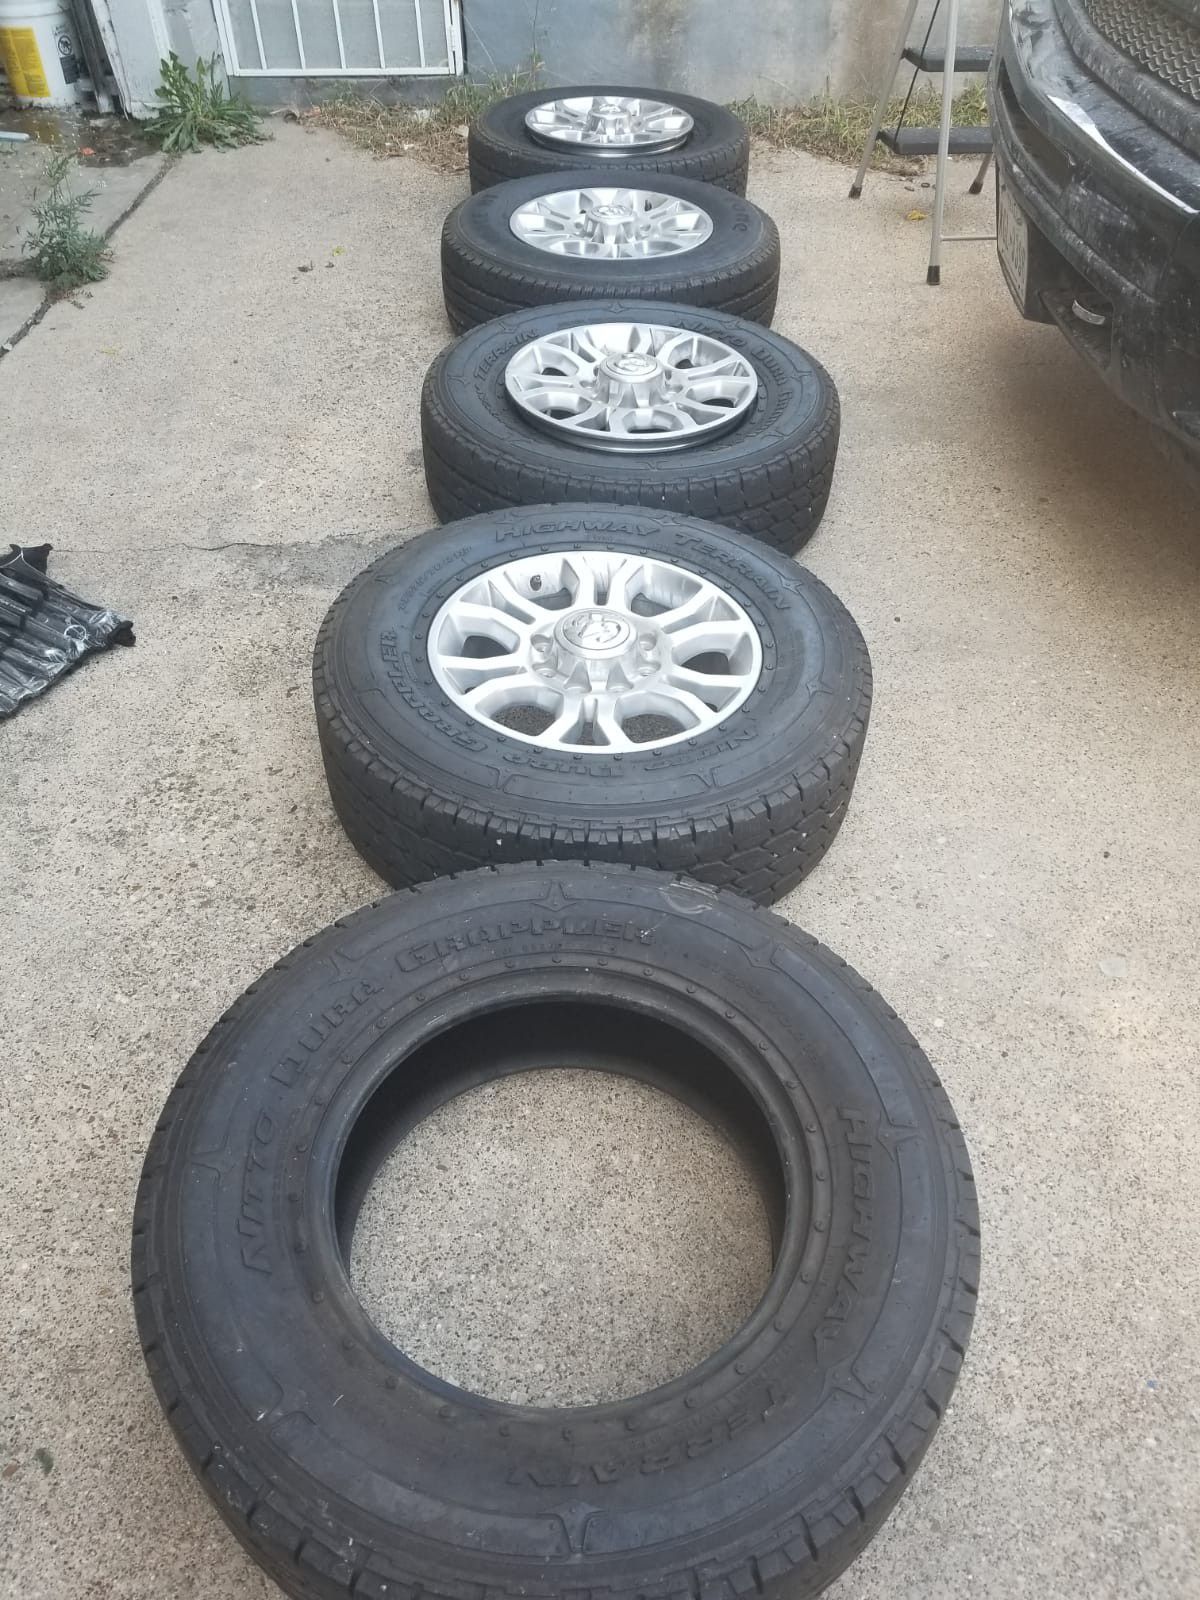 Tires LT 275/70R18 Nitto highway terrain Has about 5,000 mile usage 4 rims with Tires plus 1 extra tire